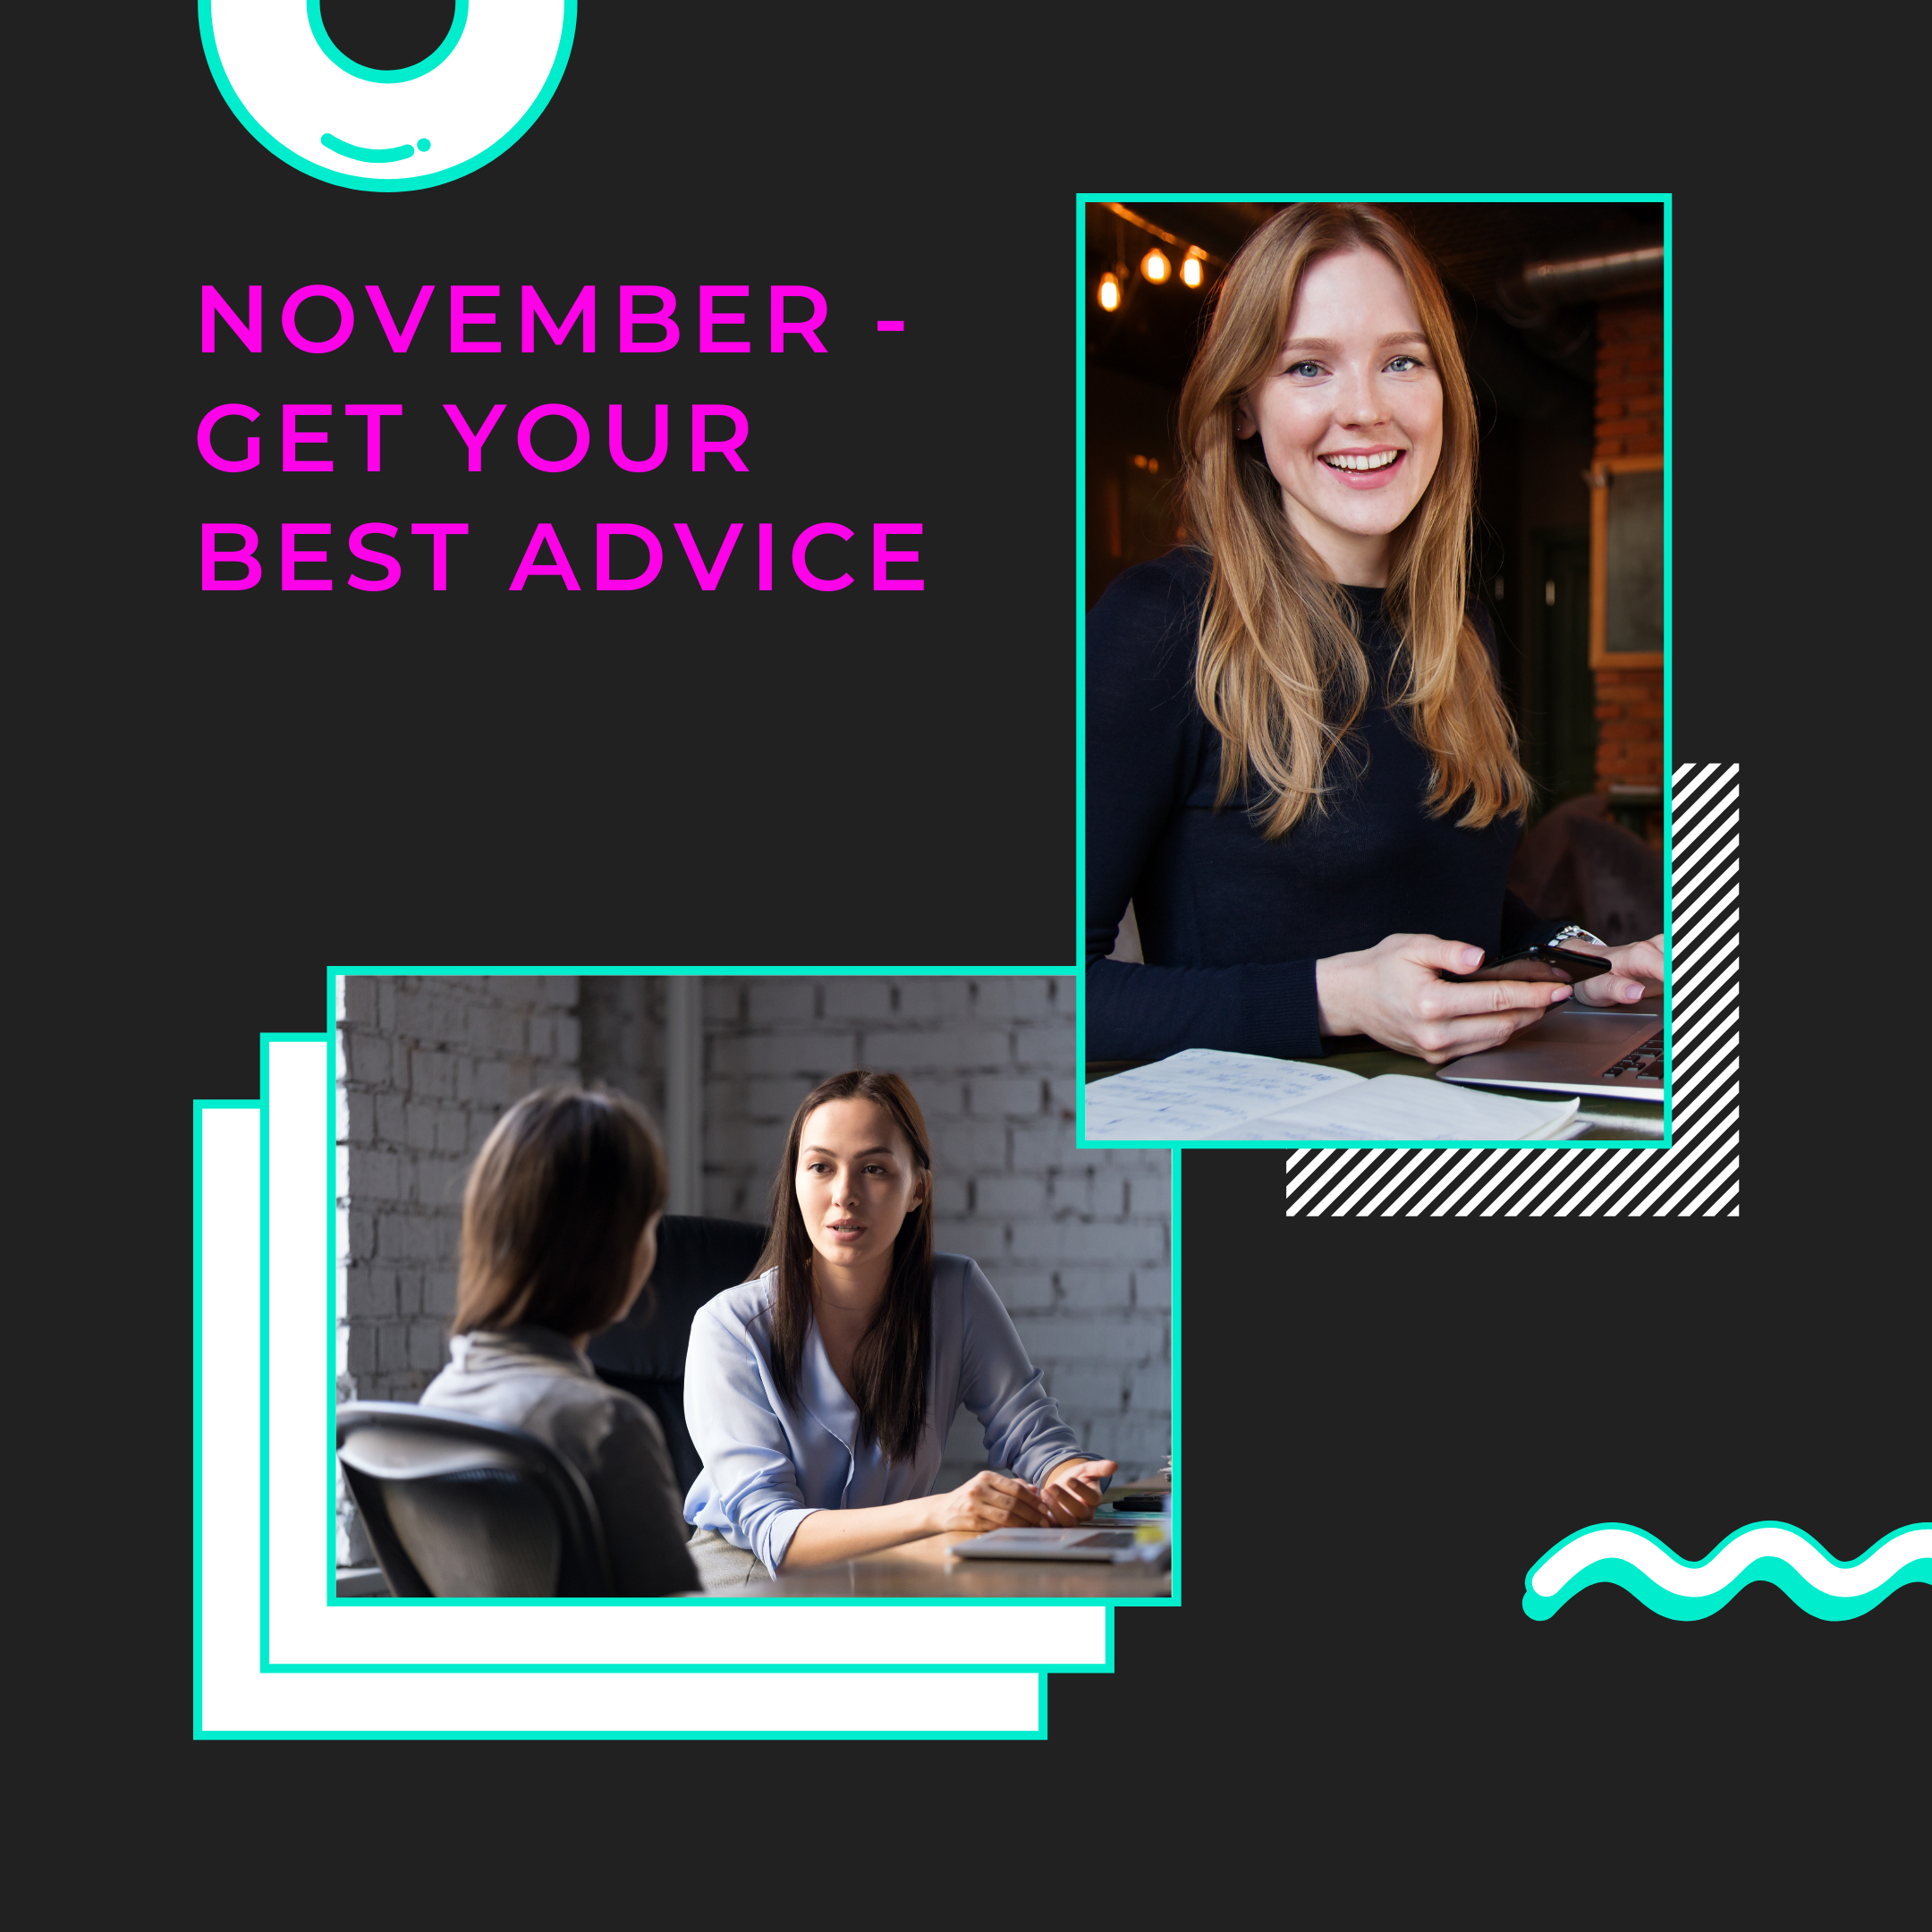 Get your best advice in November